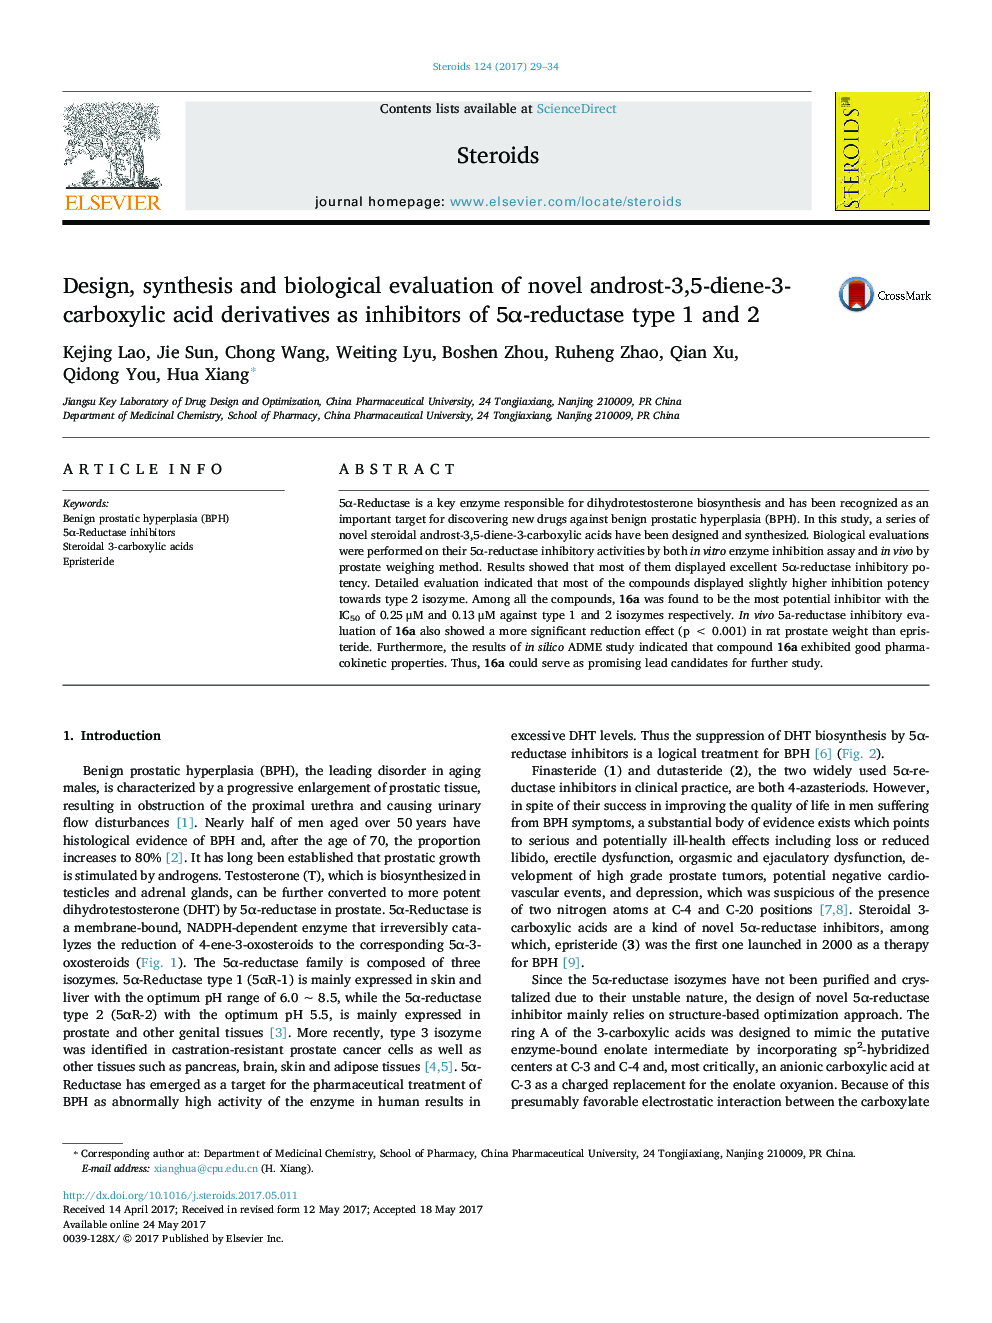 Design, synthesis and biological evaluation of novel androst-3,5-diene-3-carboxylic acid derivatives as inhibitors of 5Î±-reductase type 1 and 2